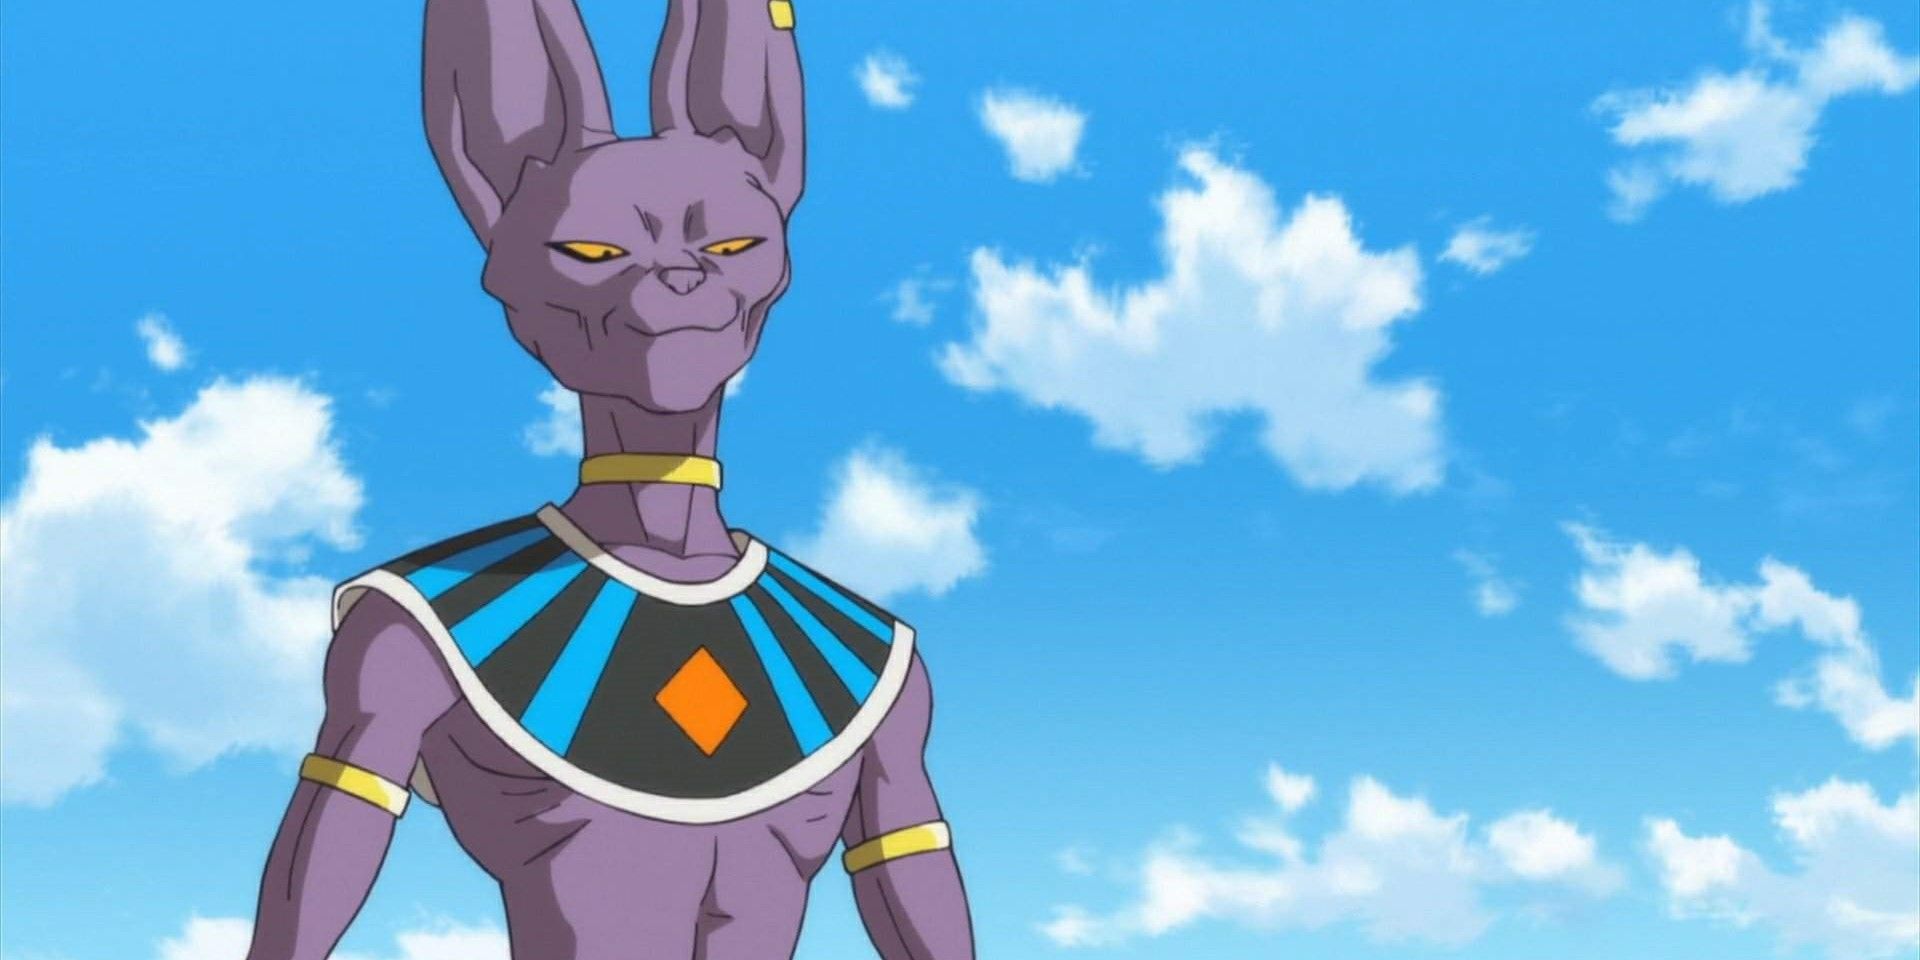 Beerus on Earth, ready to fight Goku.